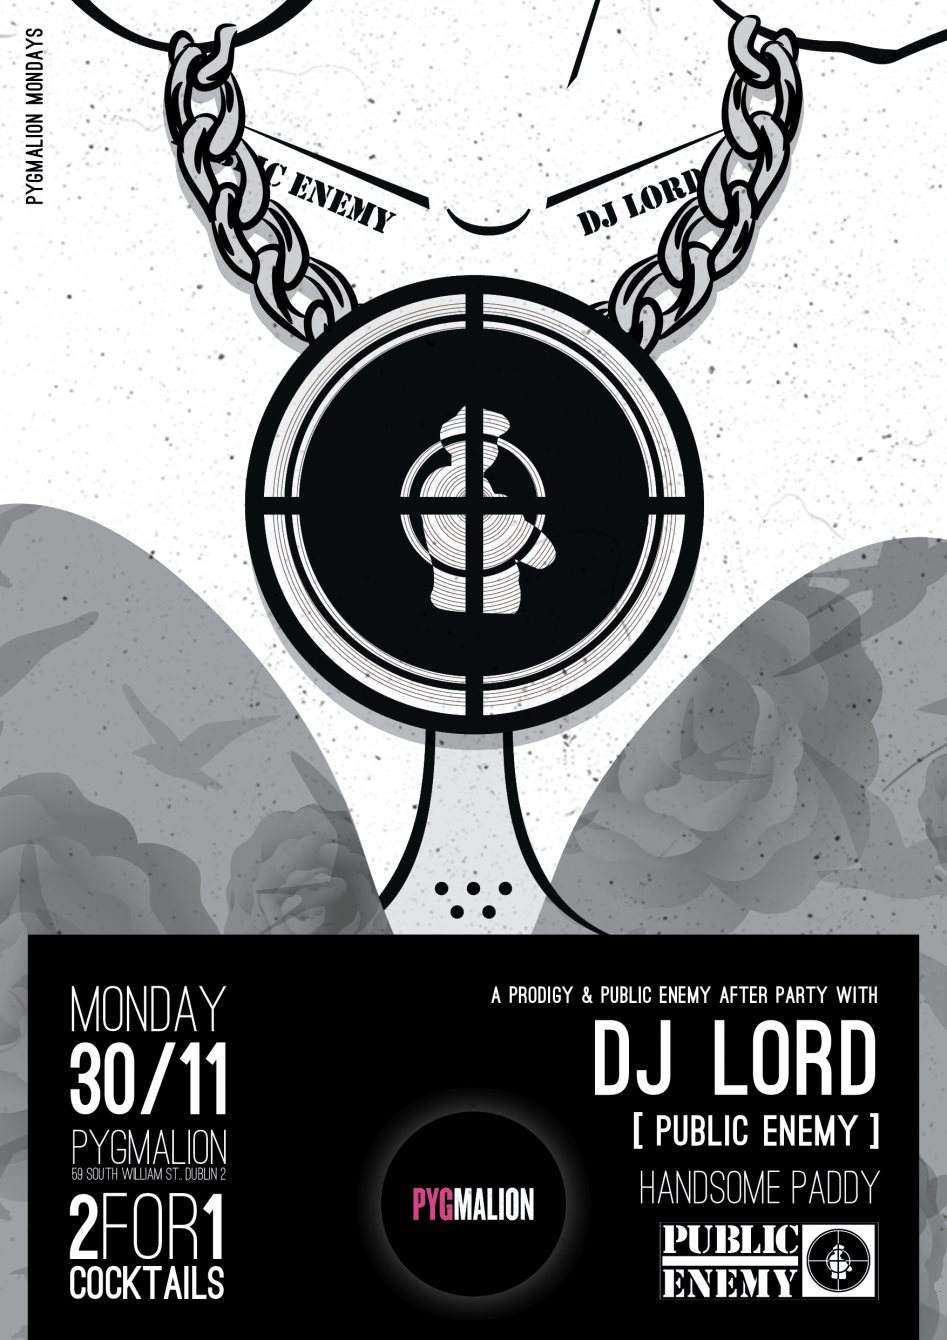 Prodigy/Public Enemy After Party with Dj Lord - フライヤー裏